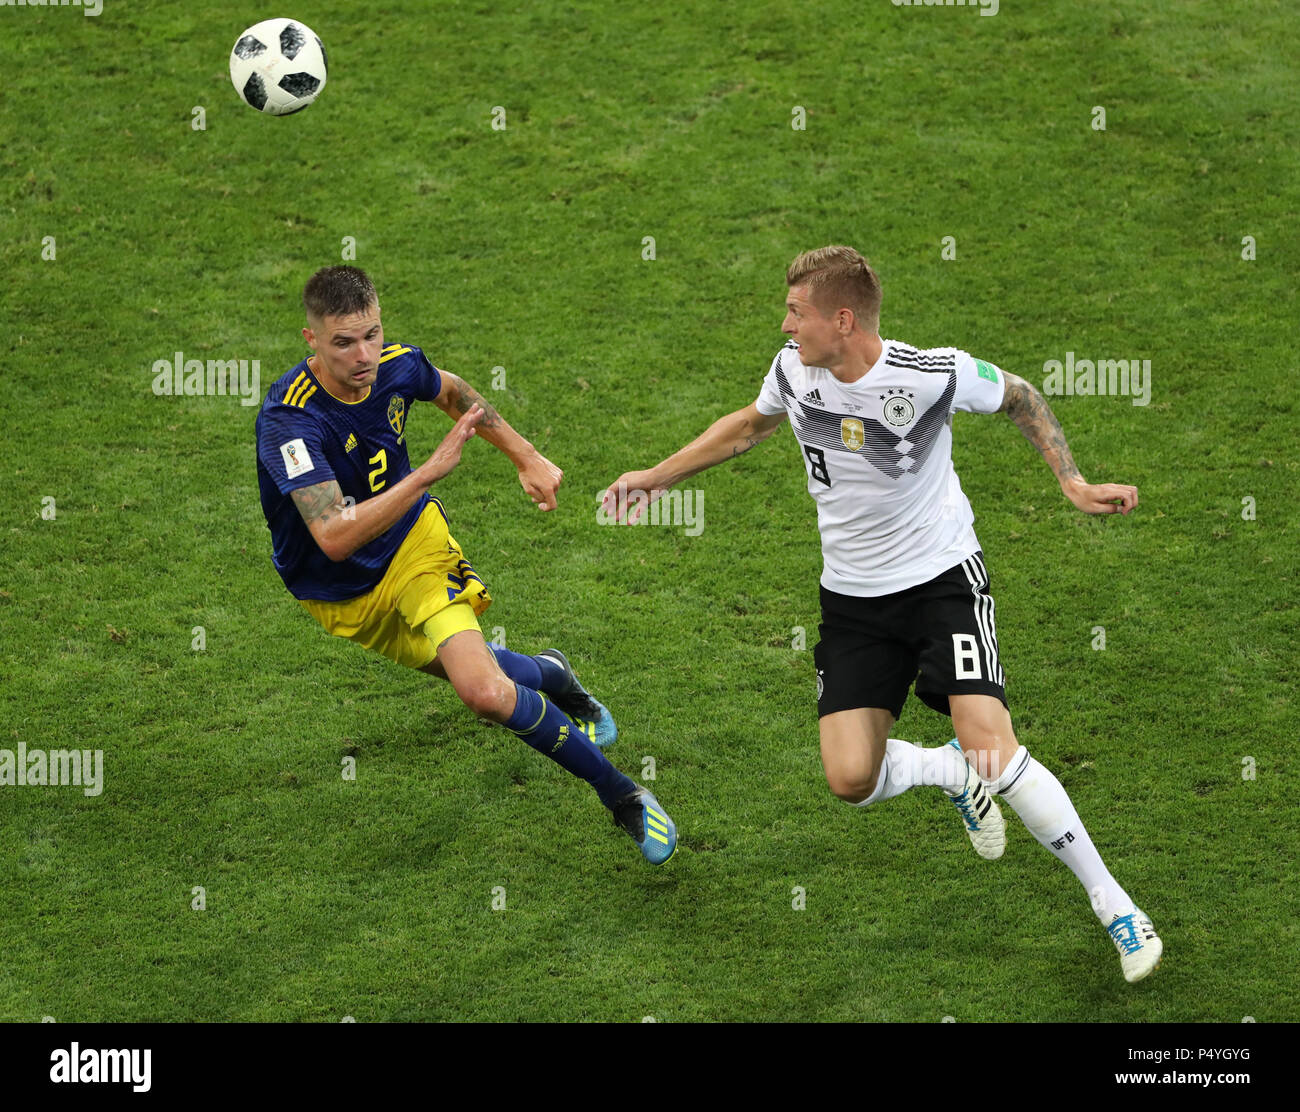 Sochi, Russia. 23rd June, 2018. Toni Kroos (R) of Germany vies with Mikael Lustig of Sweden during the 2018 FIFA World Cup Group F match between Germany and Sweden in Sochi, Russia, June 23, 2018. Credit: Ye Pingfan/Xinhua/Alamy Live News Stock Photo